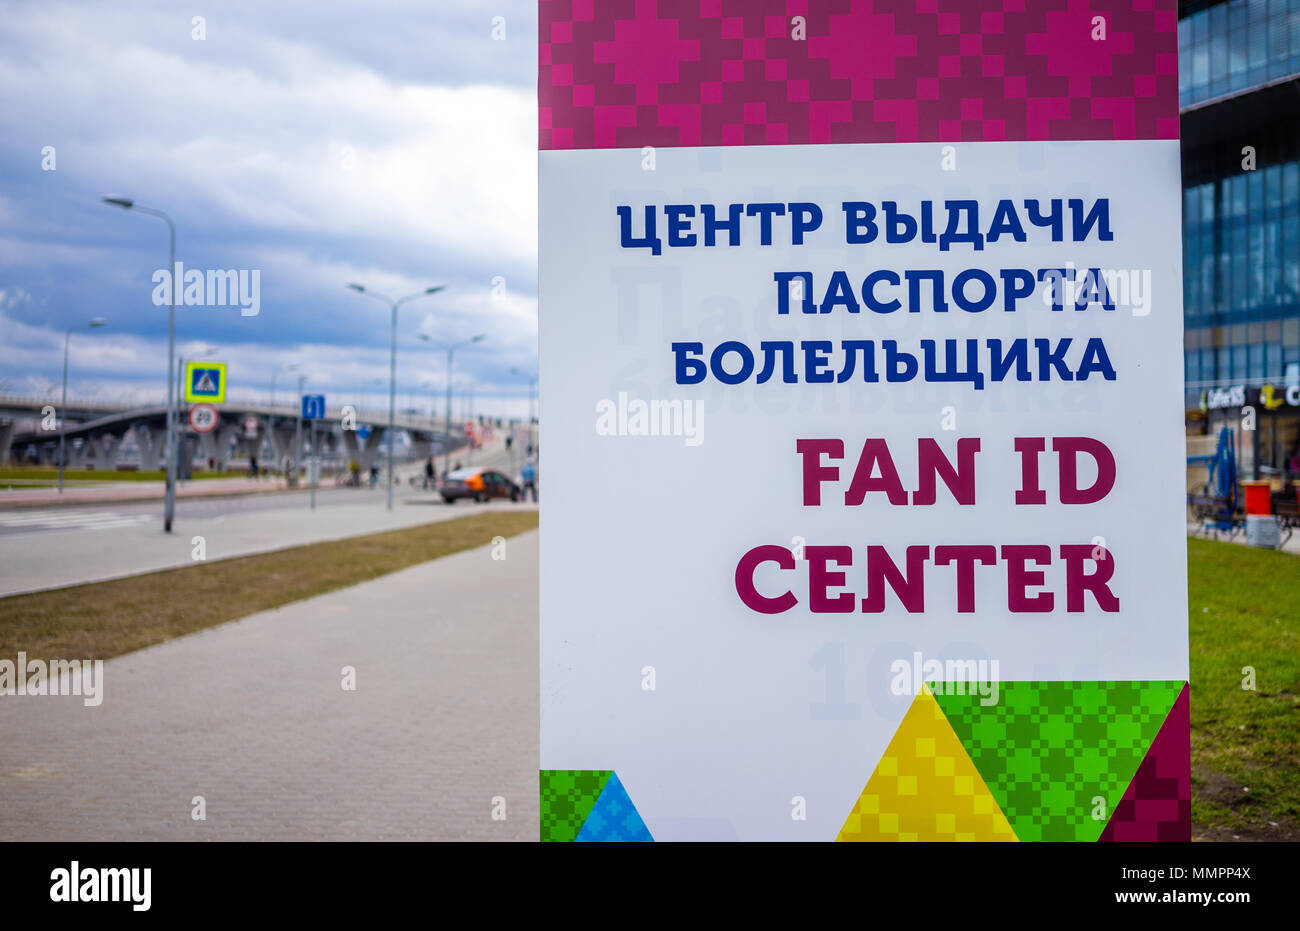 April 29, 2018 St. Petersburg, Russia Stand with information about the FAN ID Center FIFA World Cup 2018 at the St. Petersburg Arena. Stock Photo